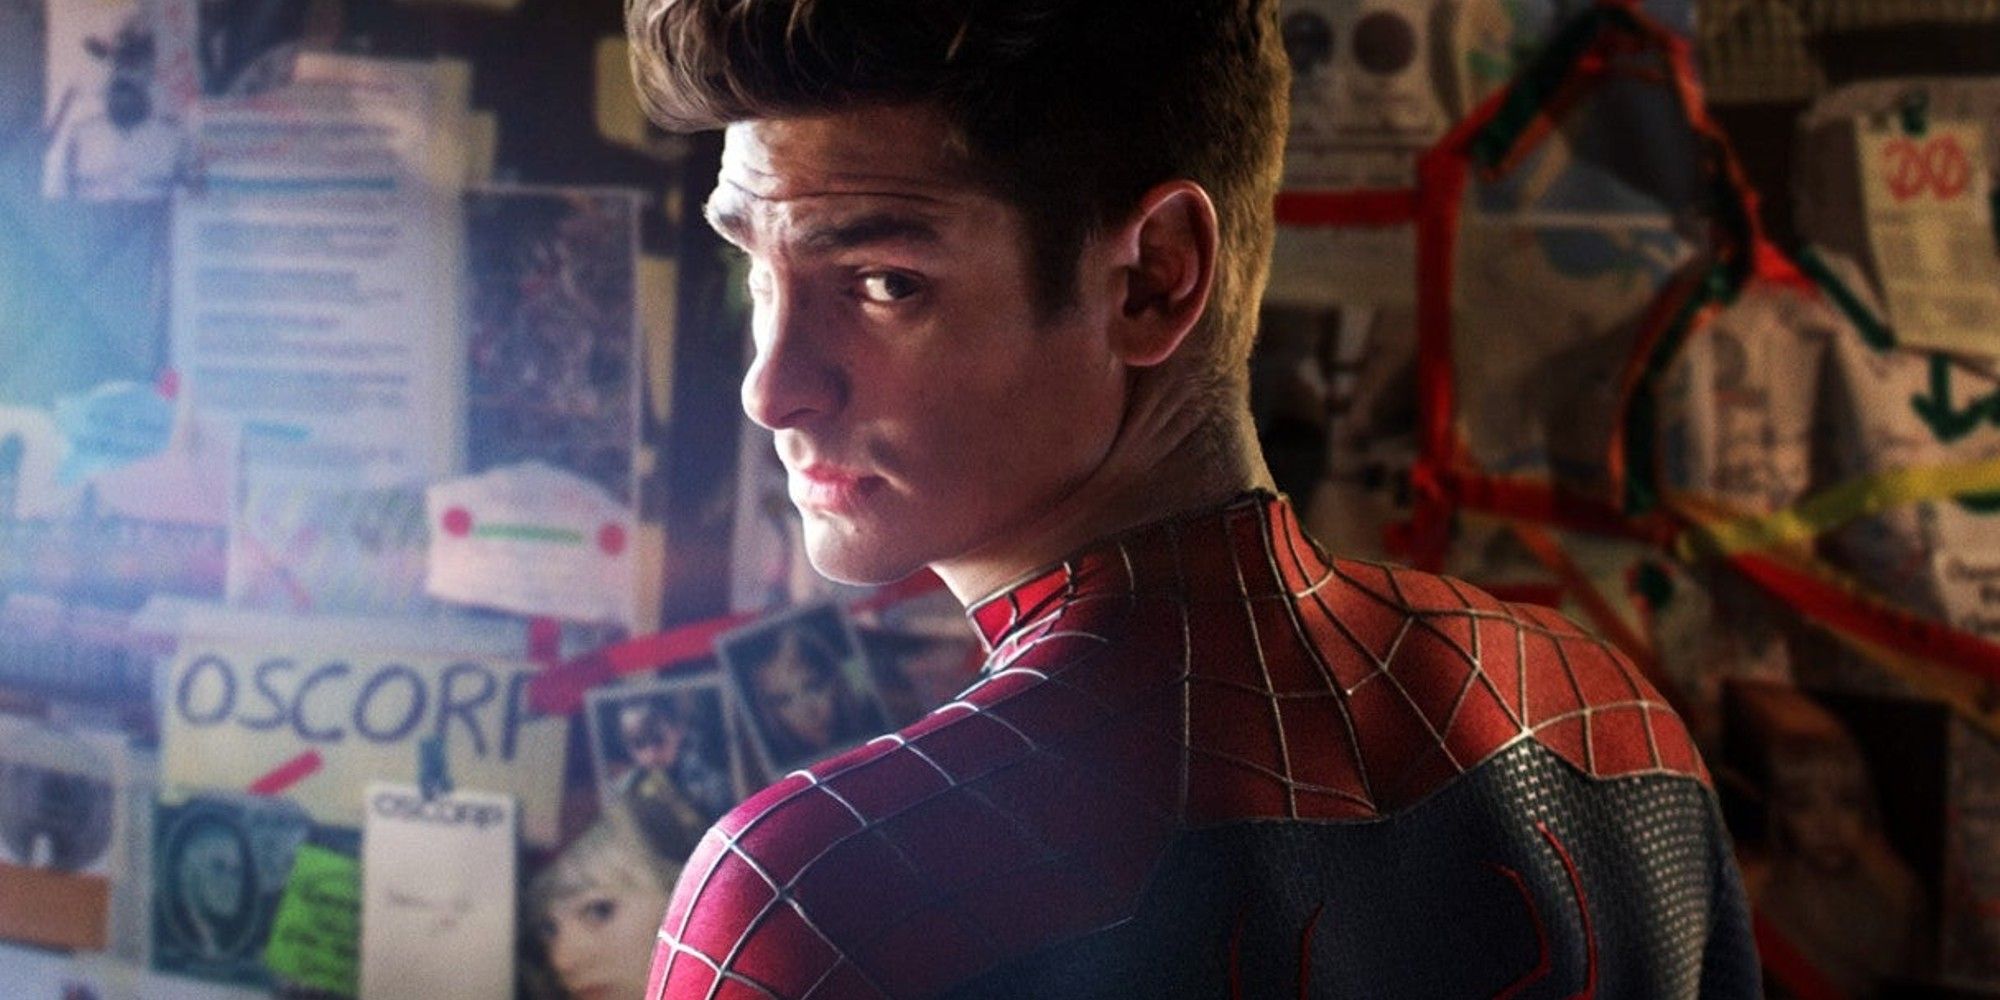 The Amazing spider-Man 2 Andrew Garfield as Peter Parker